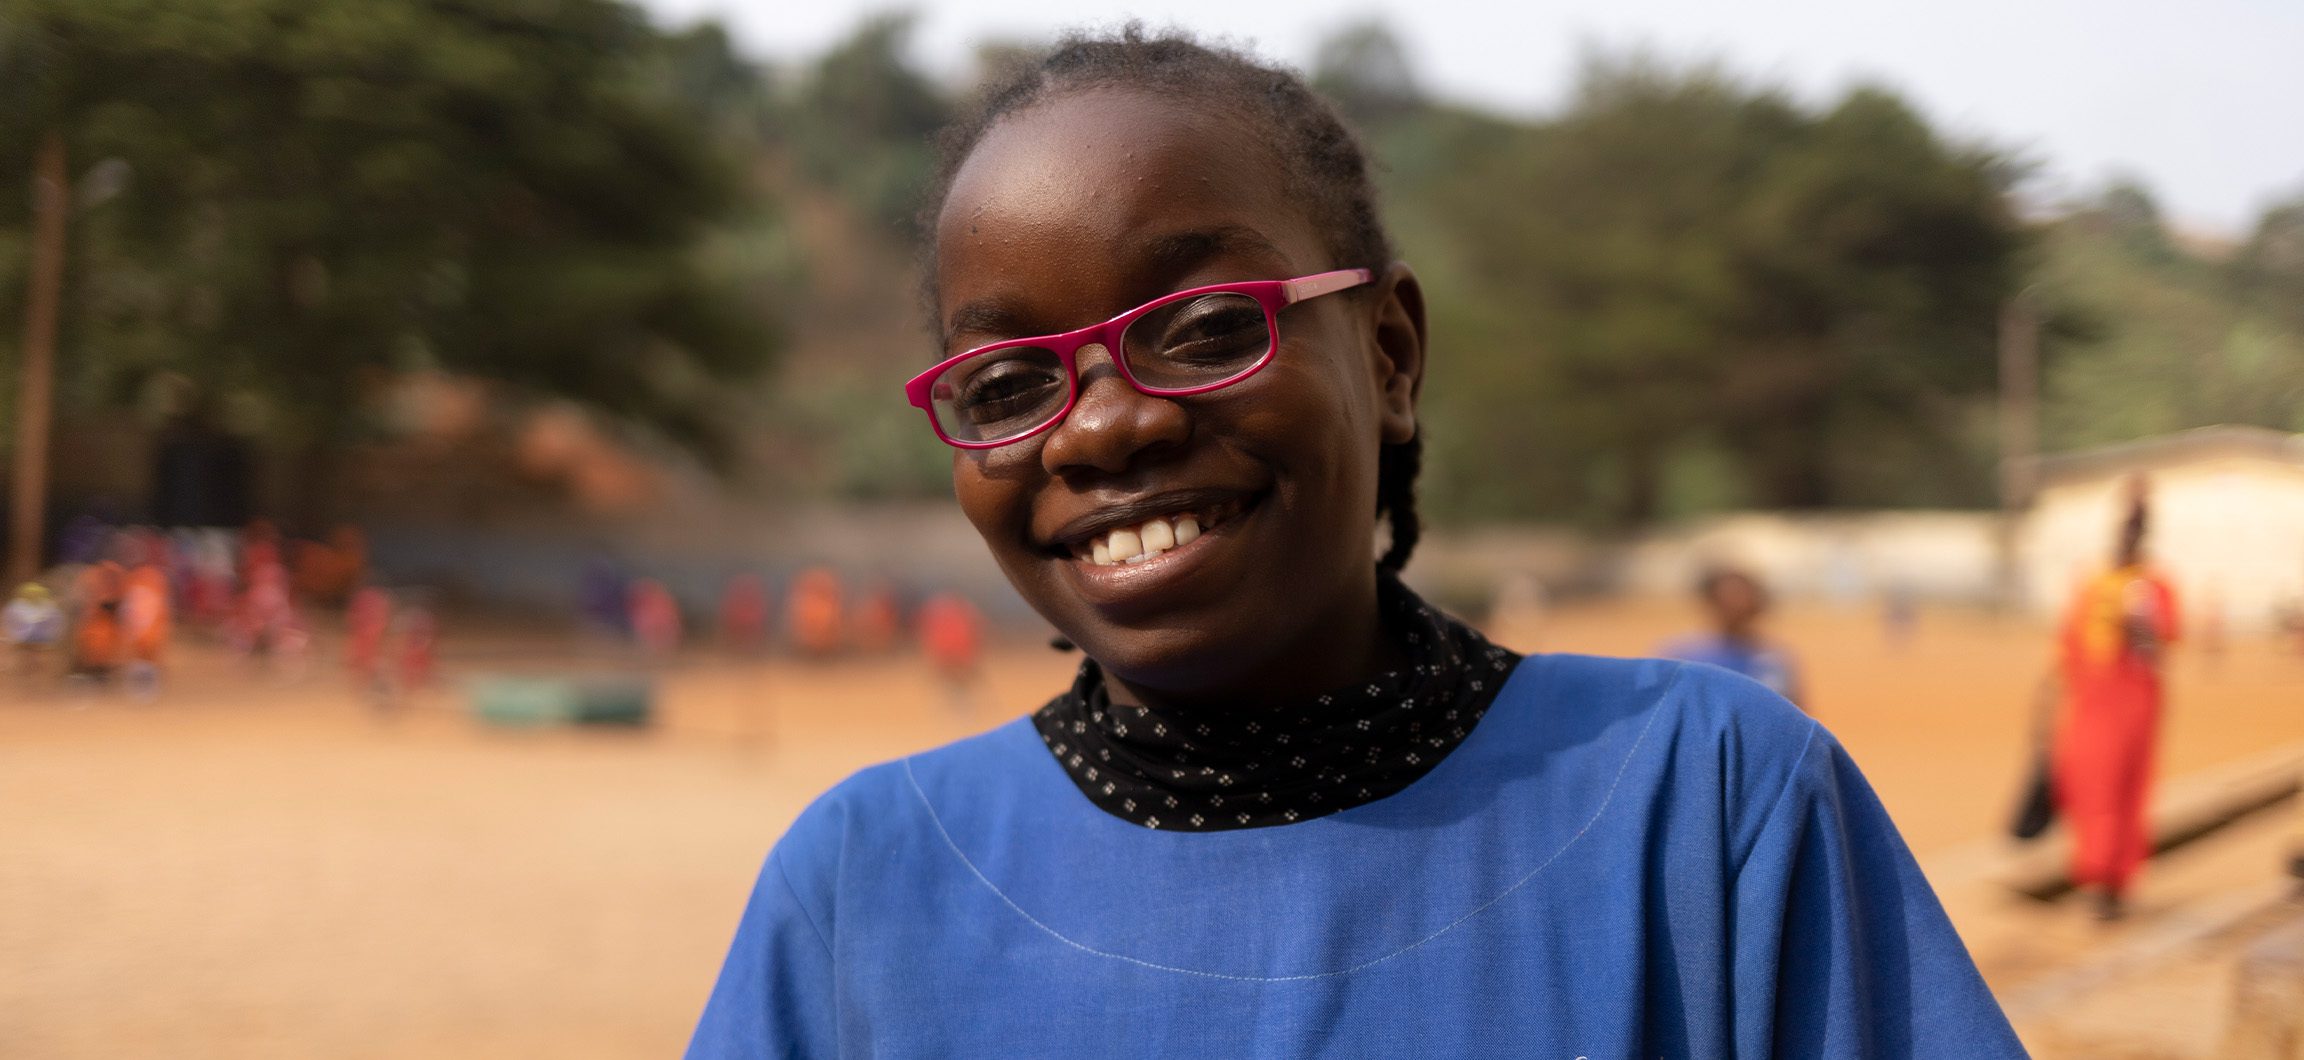 A little girl from Cameroon smiling wearing her new glasses.